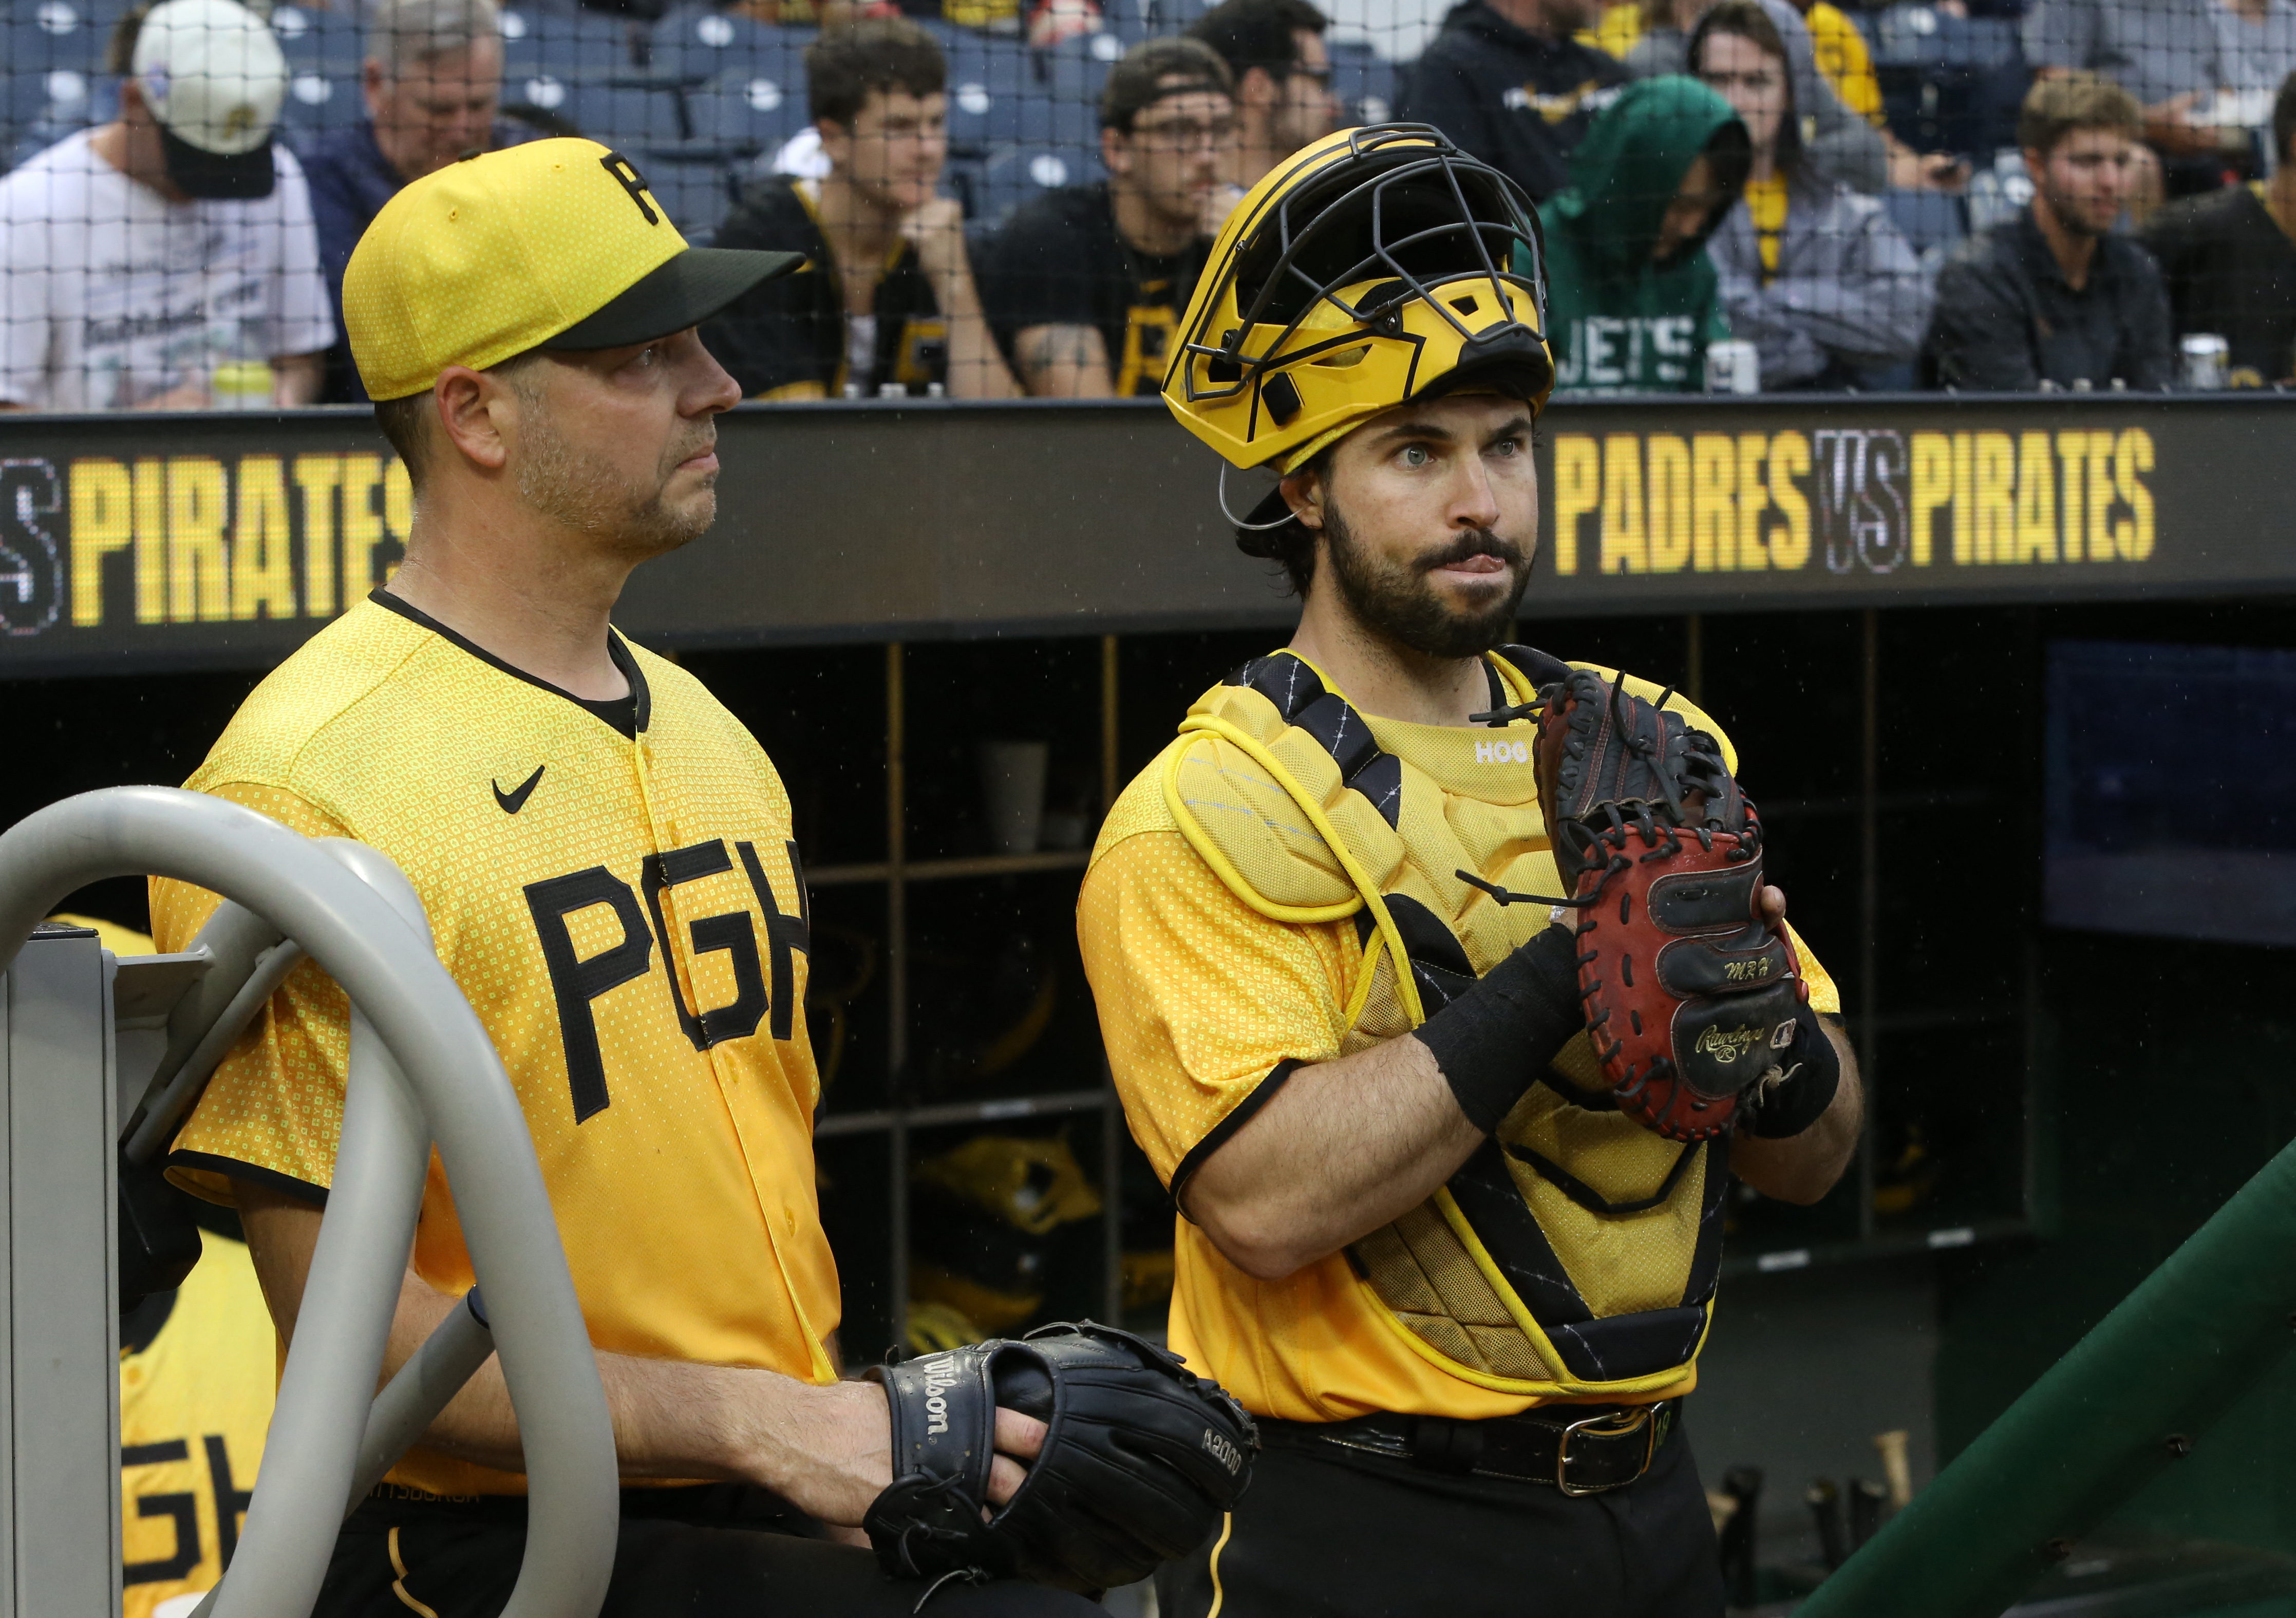 Long ball helps Pirates best Padres - Field Level Media - Professional  sports content solutions